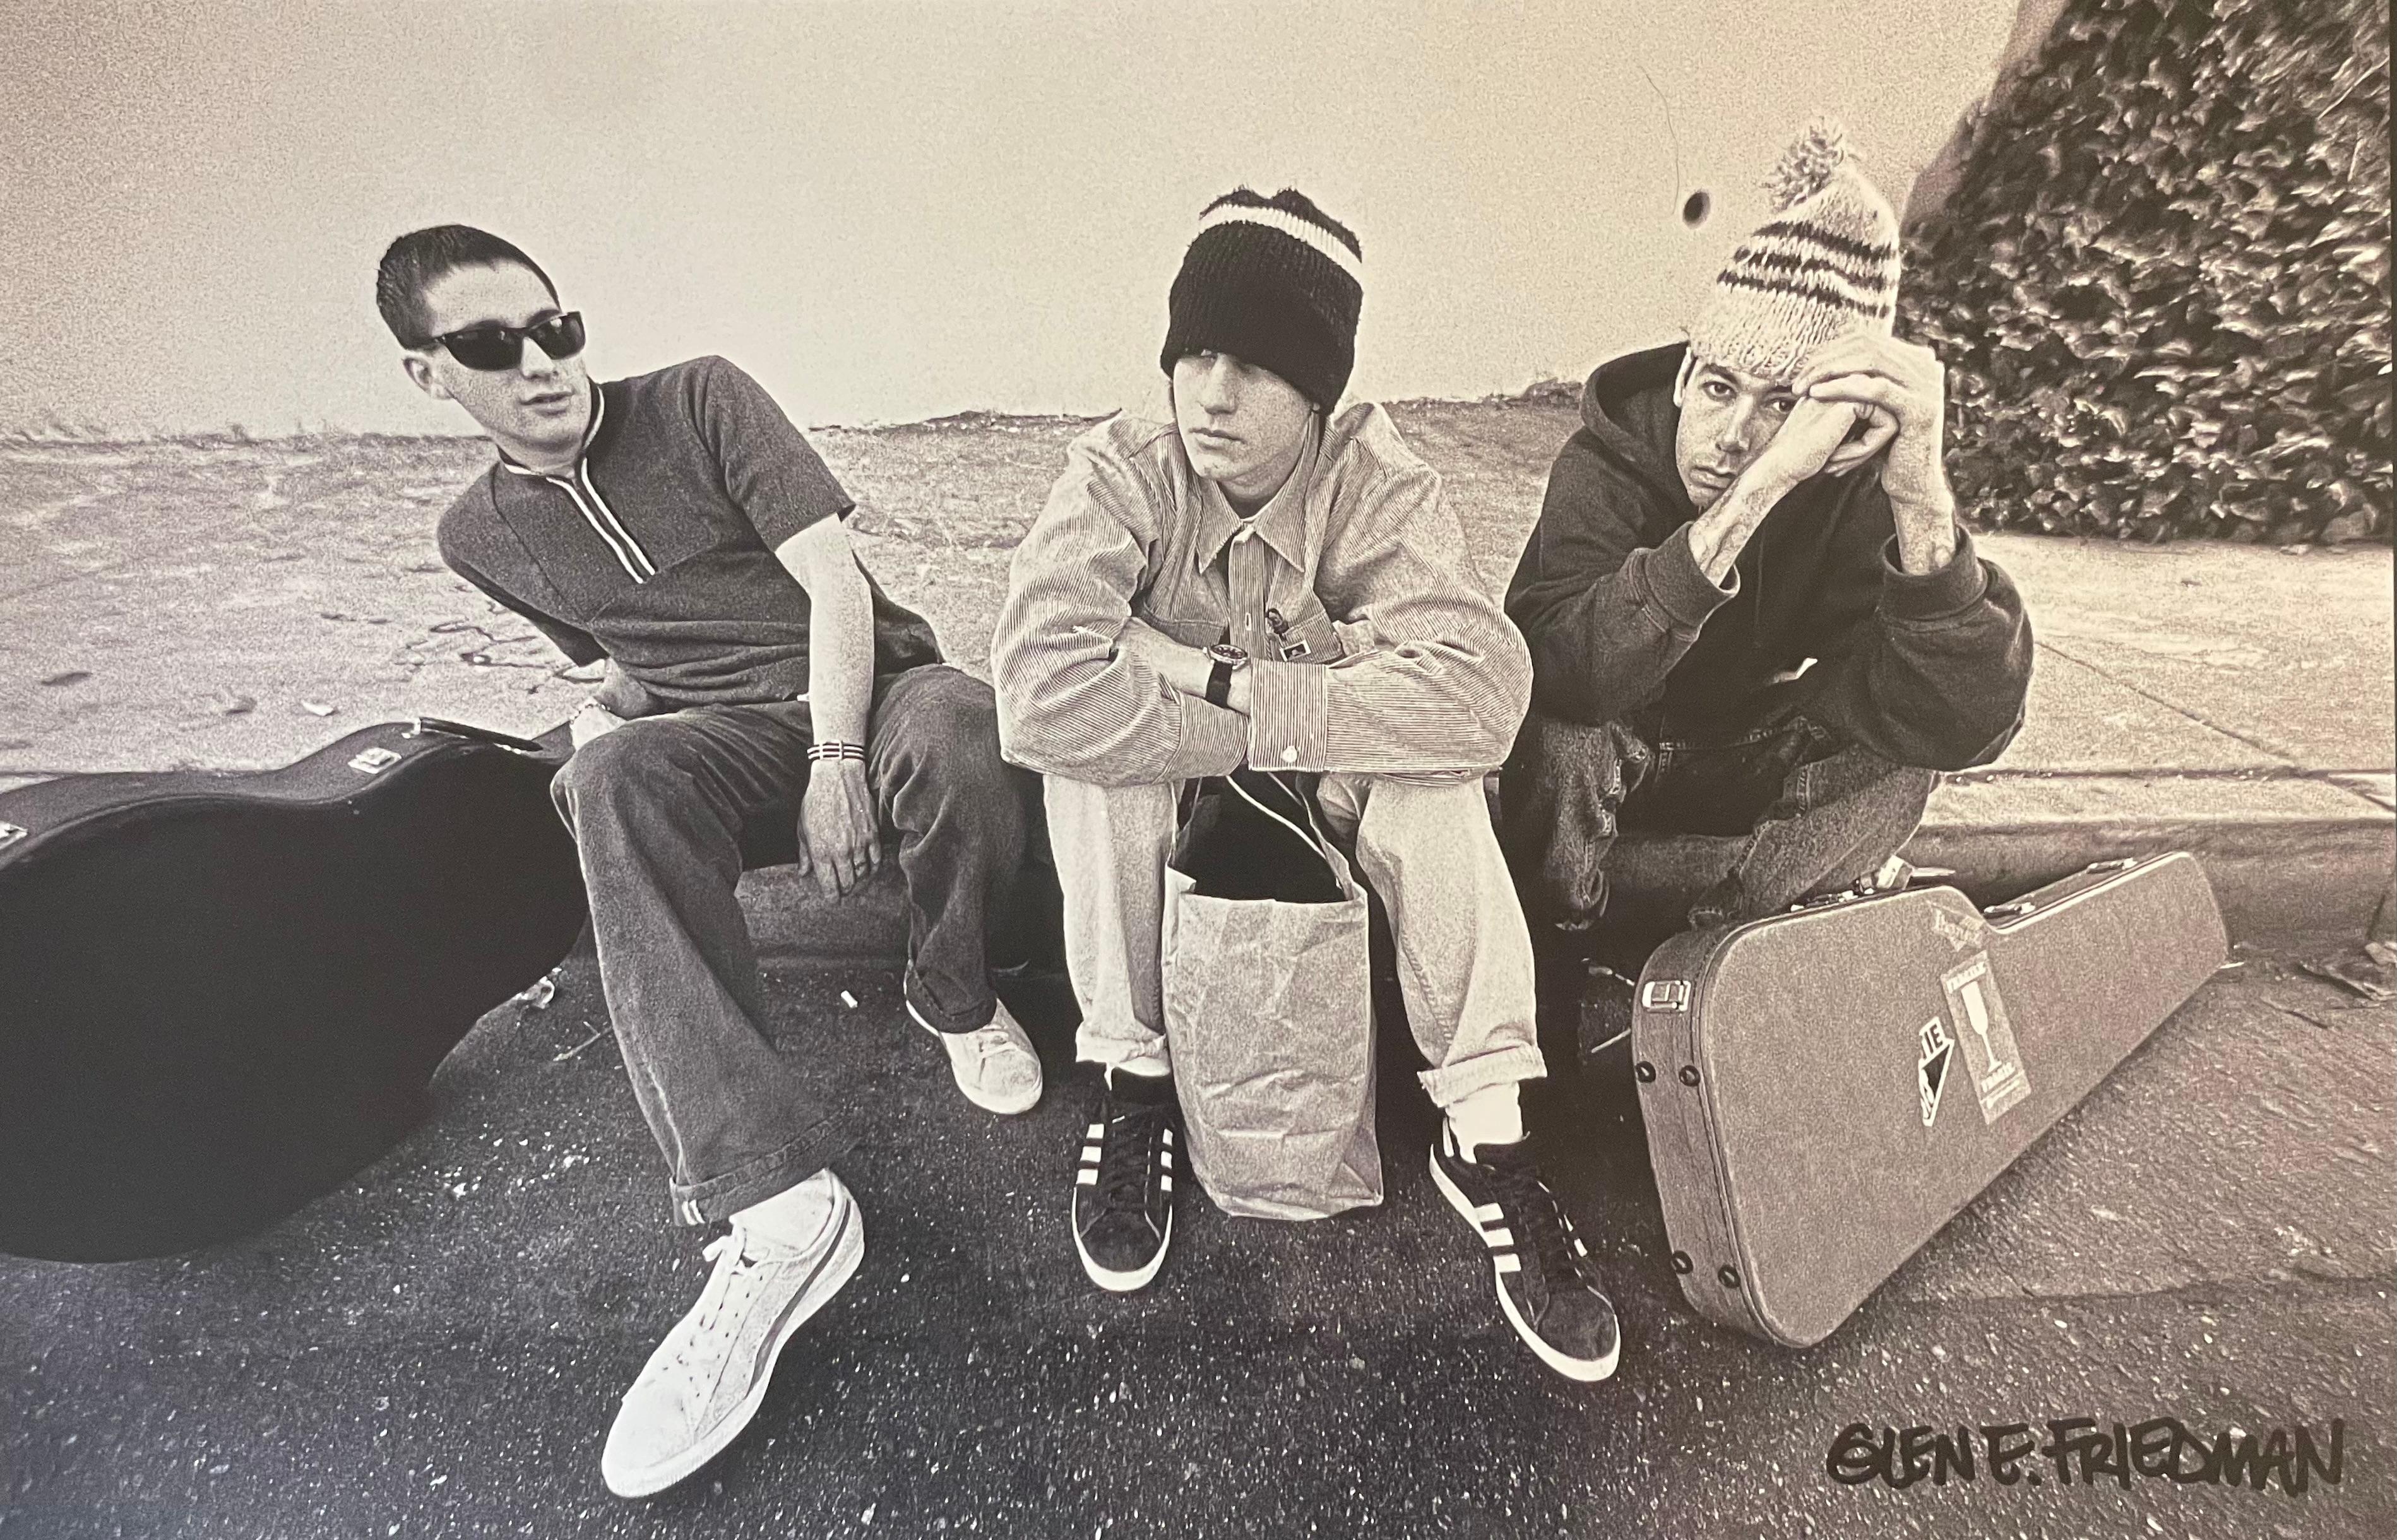 GICLEE print is printed on exceptional ‘Hahnemuhle FineArt Baryta a-Cellulose Bright White High Gloss archival paper’ 325 gsm
18 × 24 in
45.7 × 61 cm
Edition 475/500

BEASTIE BOYS on the curb in Hollywood just around the corner from the Capitol